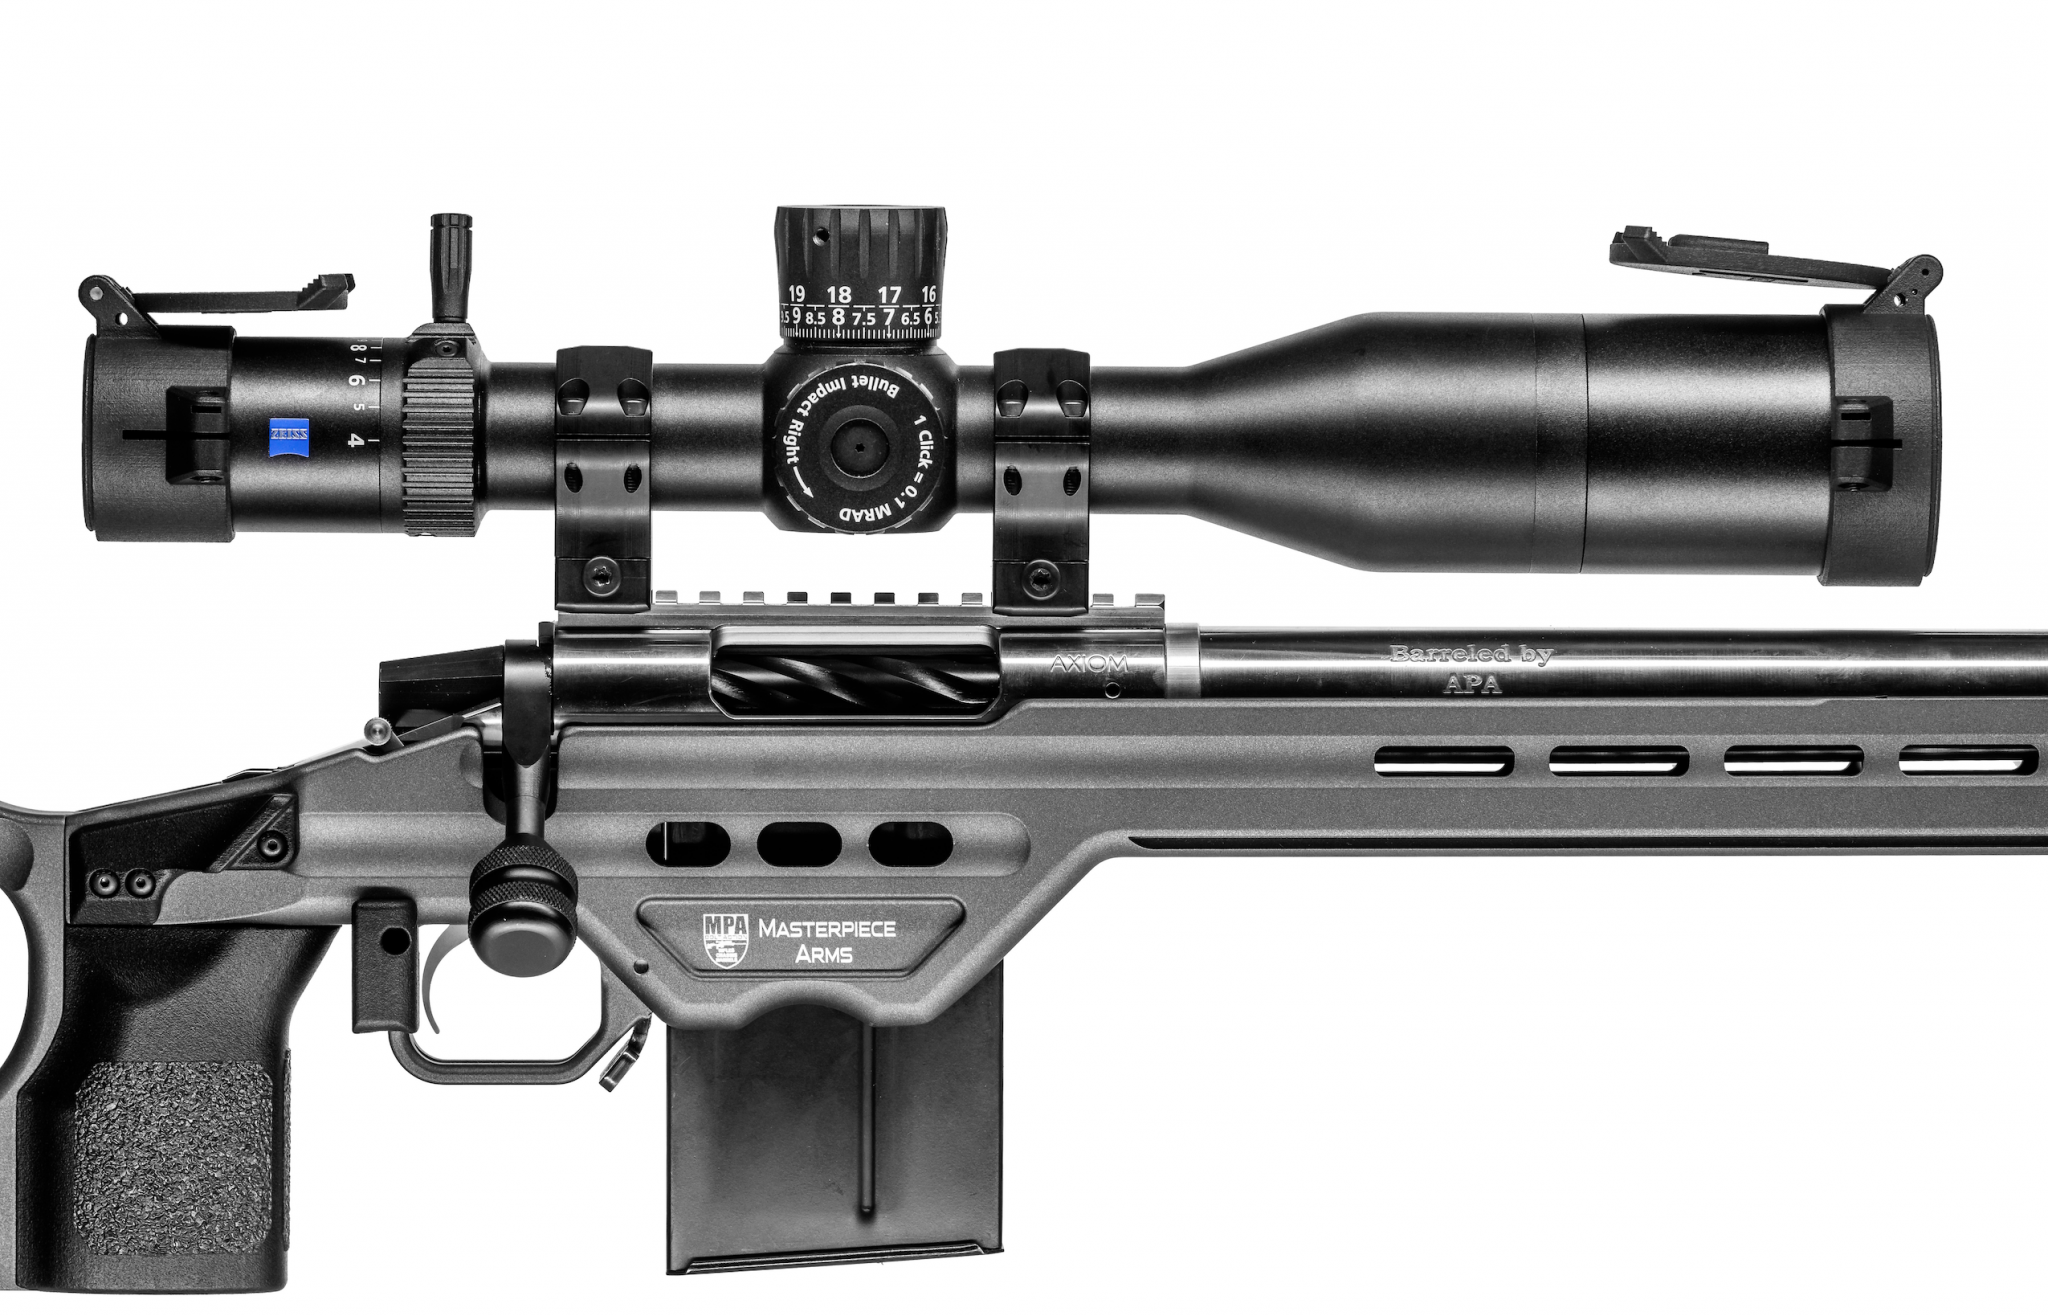 Flip-Up-Folded Flat-LRP S3 Atop Centerfire Rifle-with Sunshade-CC_49 copy.png